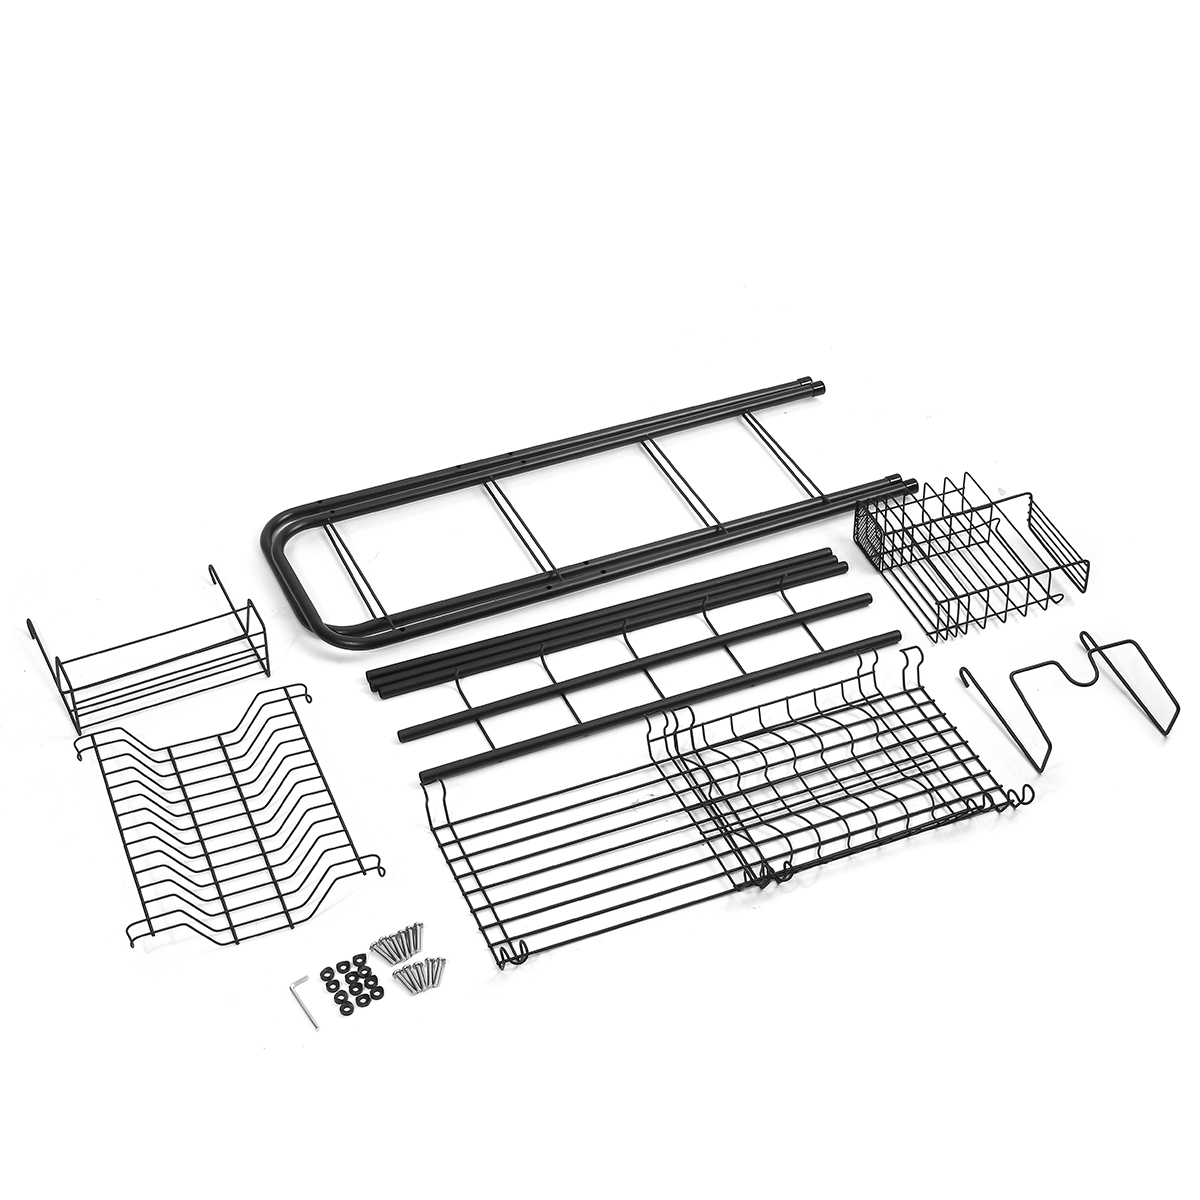 Double-Layer-Shelf-Dish-Stainless-Holder-Steel-Sink-Drain-Rack-Kitchen-Cutlery-Drying-Drainer-Kitche-1566519-6